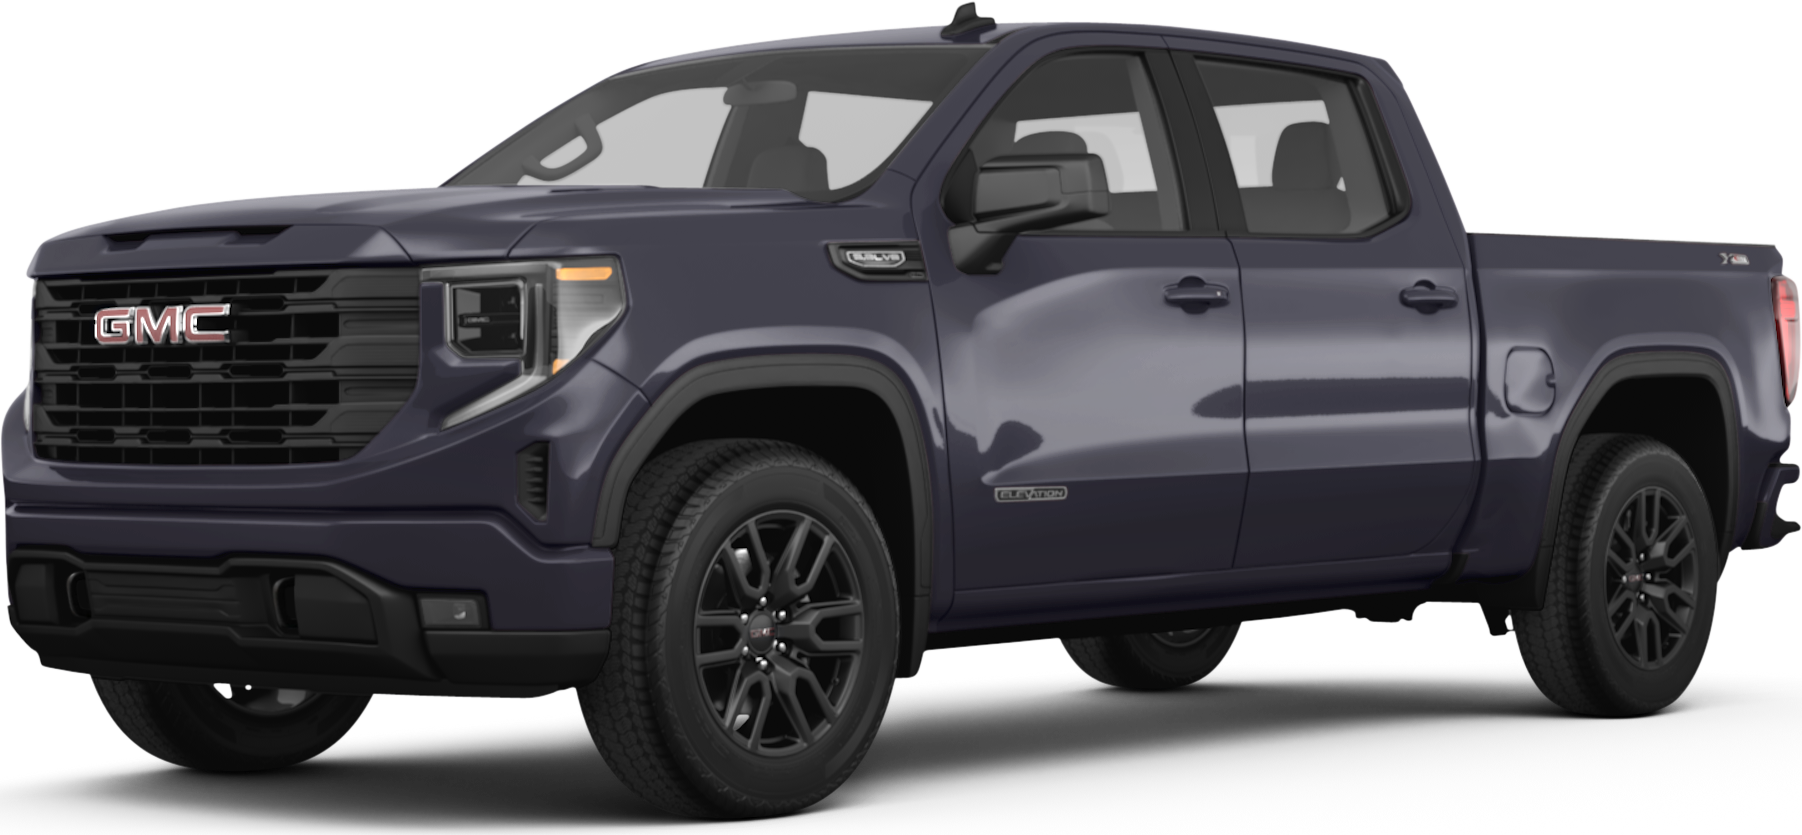 2023 GMC Sierra 1500 Crew Cab Price, Reviews, Pictures & More Kelley